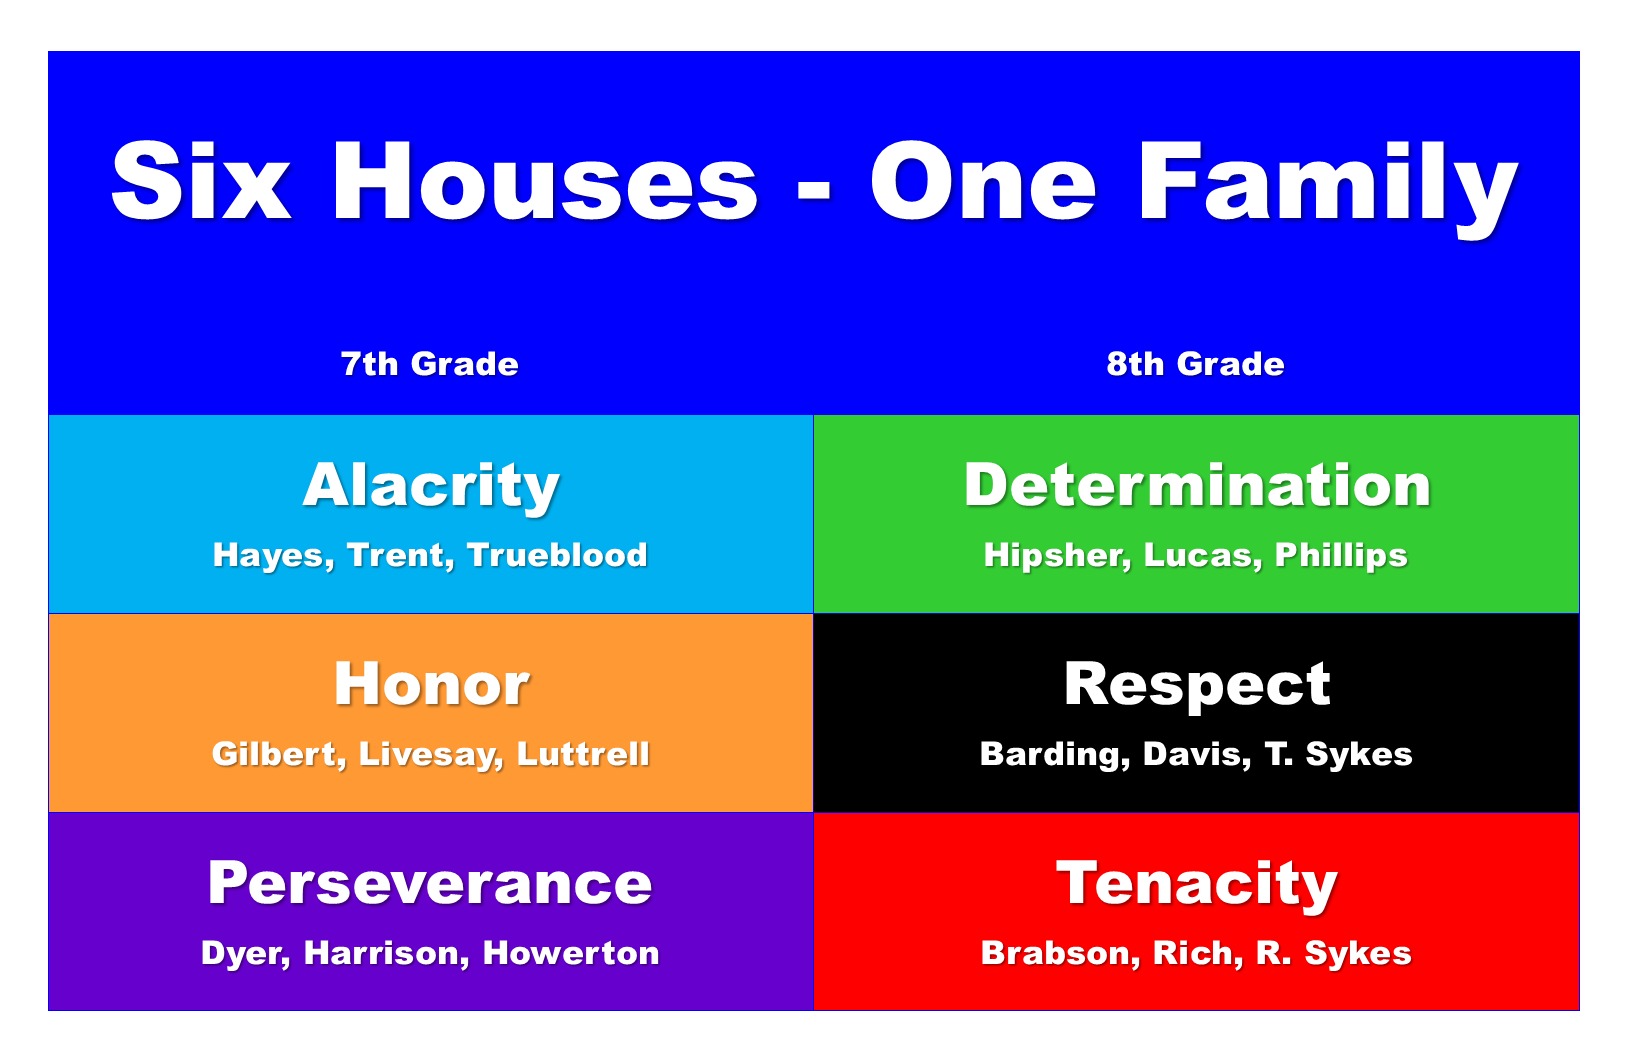 Six Houses - One Family